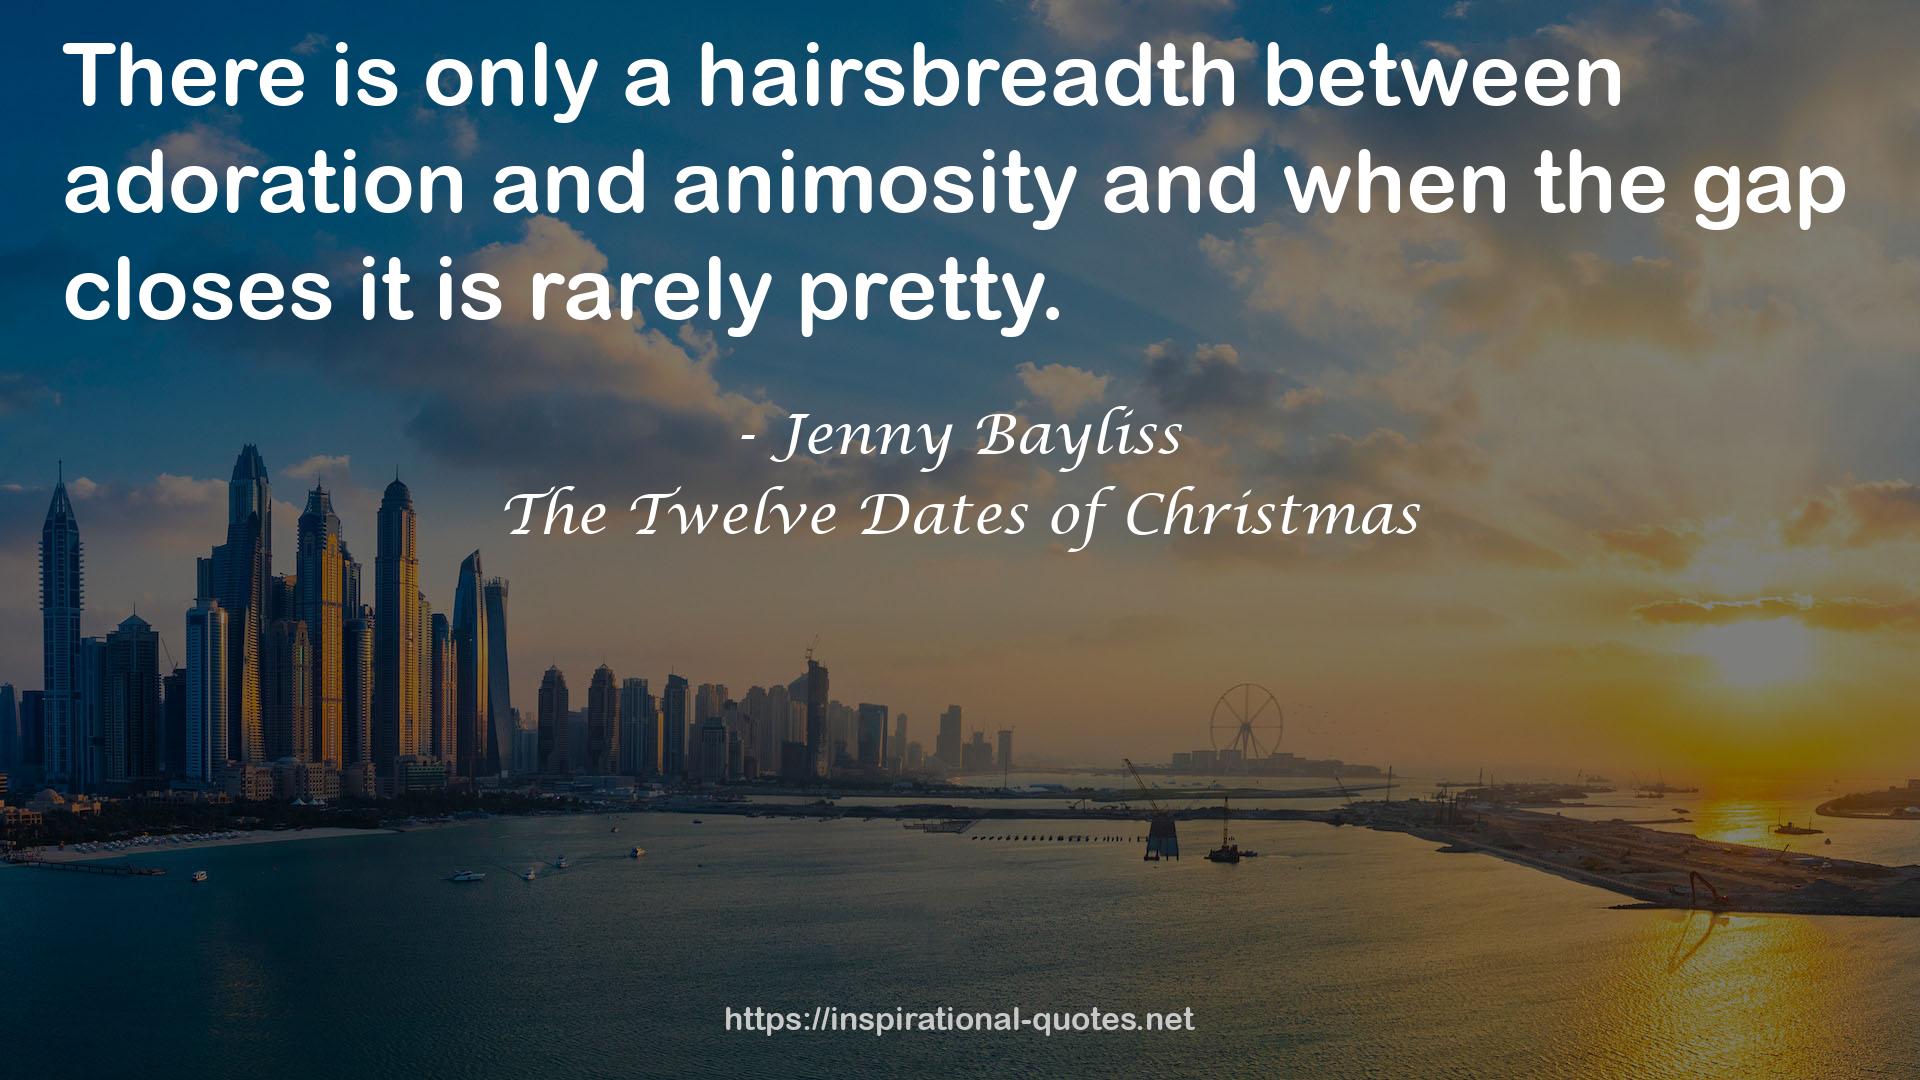 The Twelve Dates of Christmas QUOTES